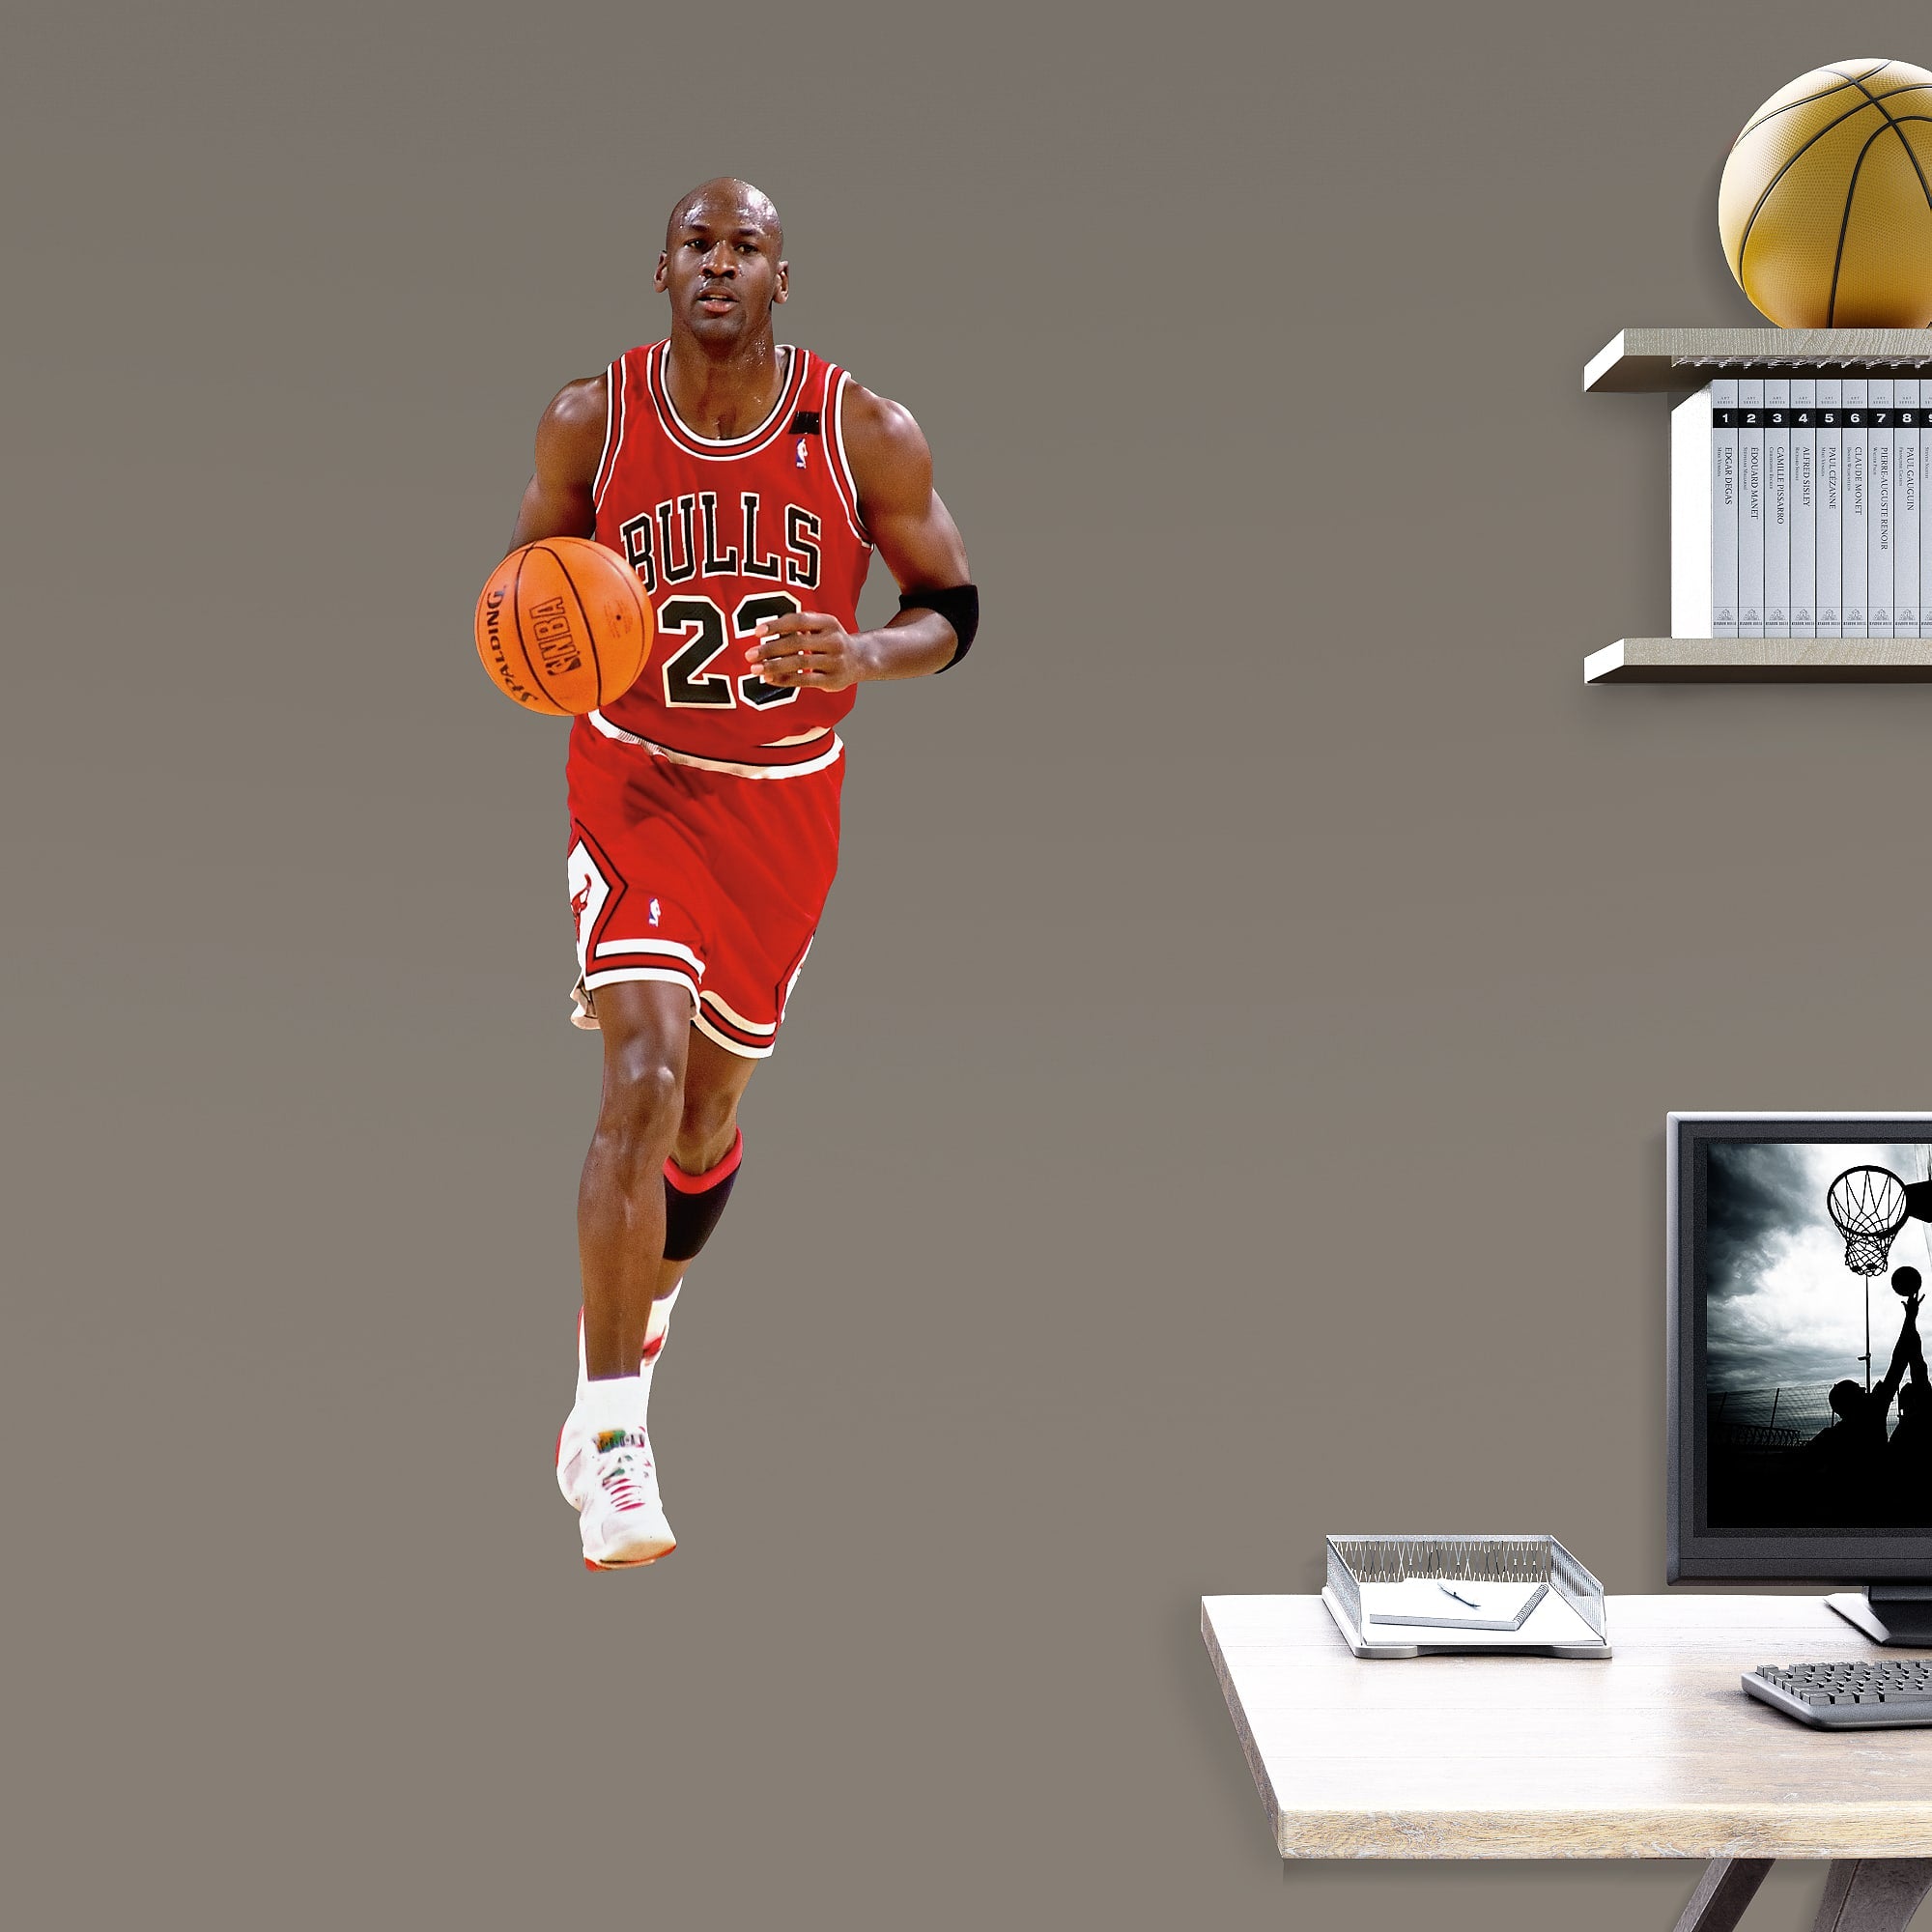 Michael Jordan for Chicago Bulls - Officially Licensed NBA Removable Wall Decal 15.0"W x 38.5"H by Fathead | Vinyl